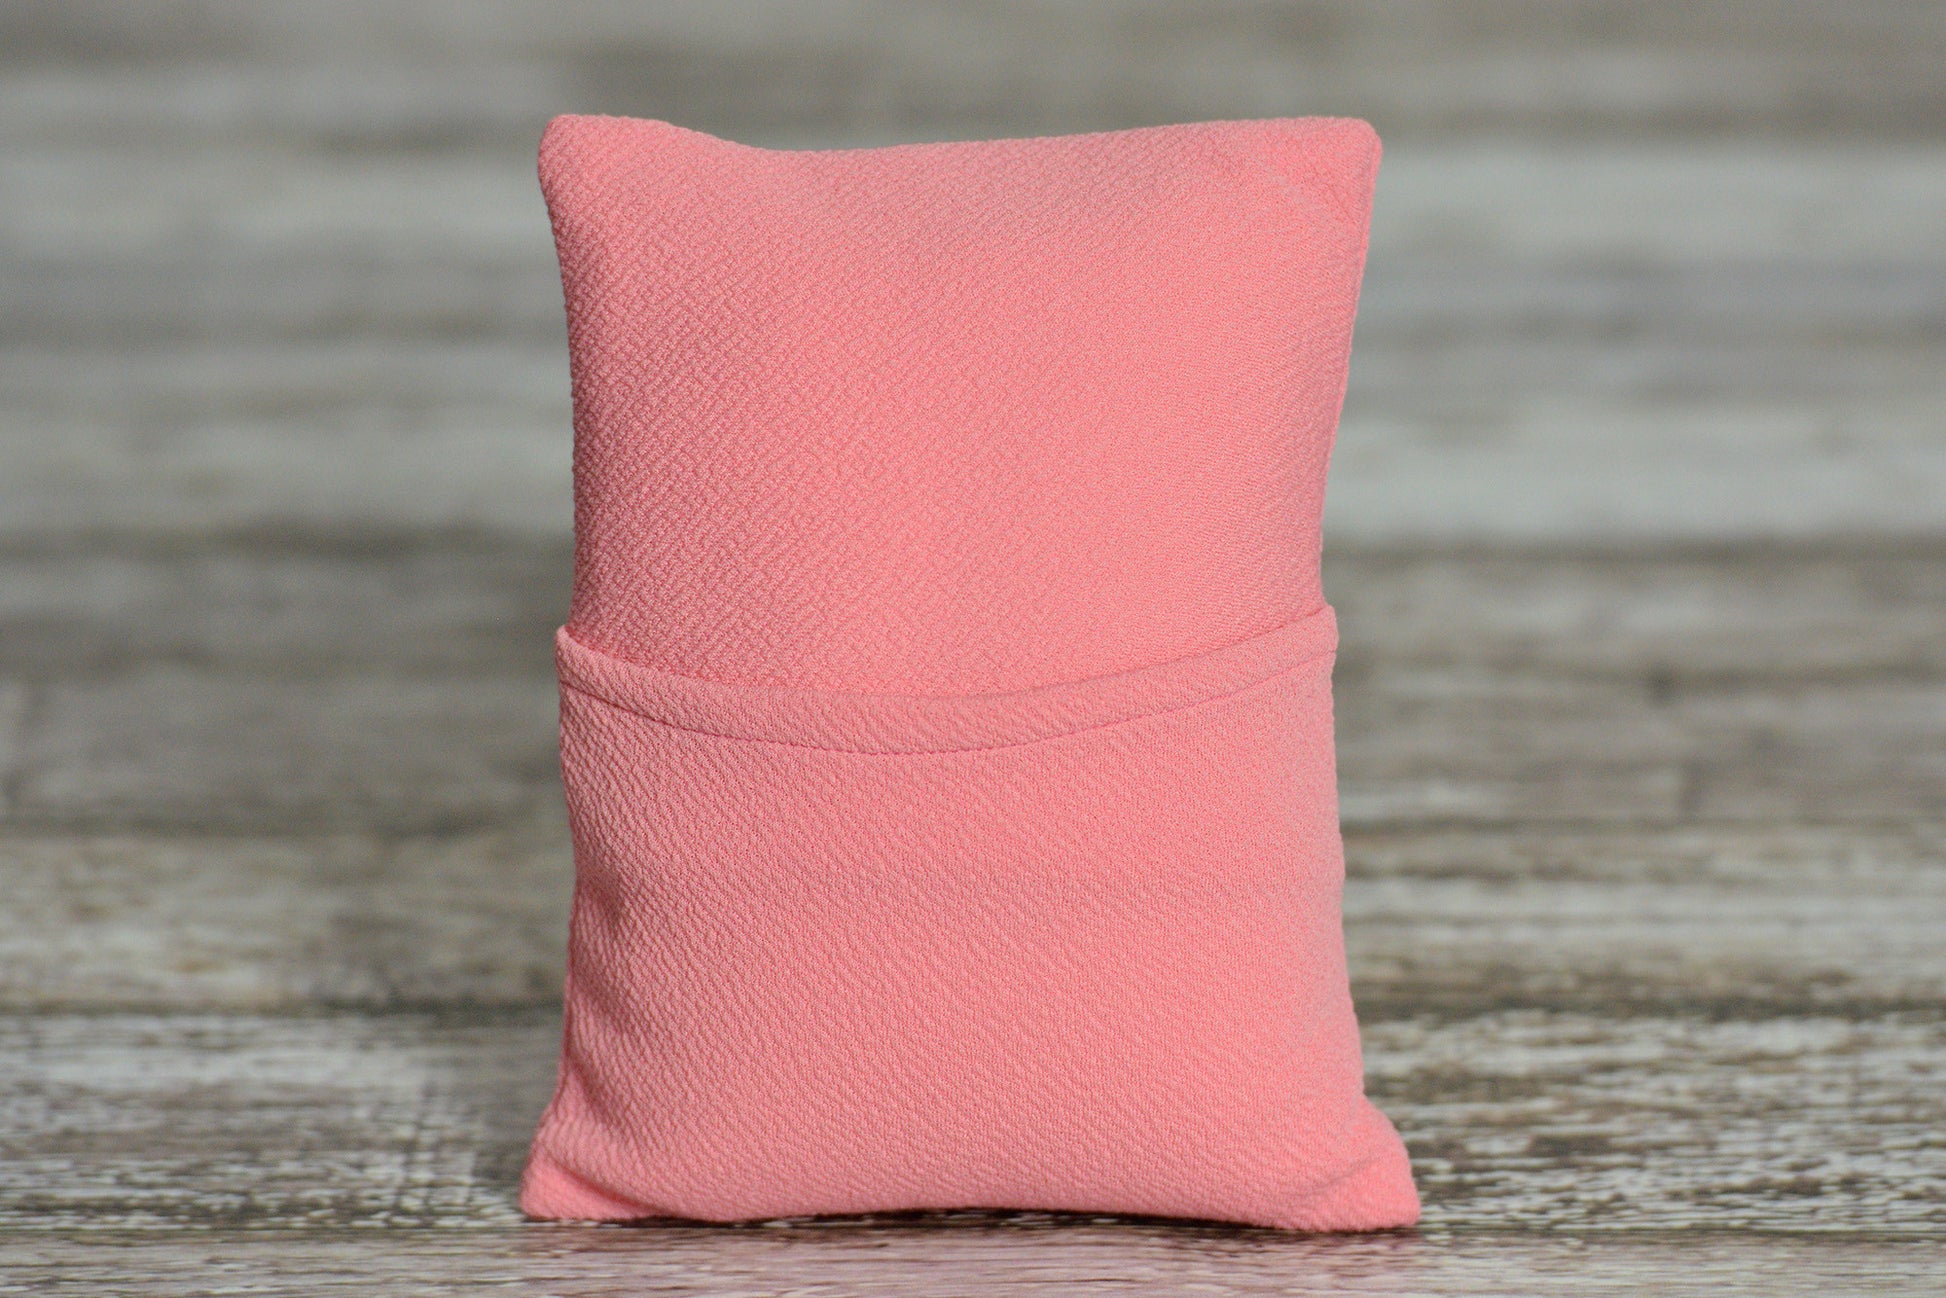 Matching Mini Pillow with Cover AND Bean Bag Fabric - Textured - Rose-Newborn Photography Props